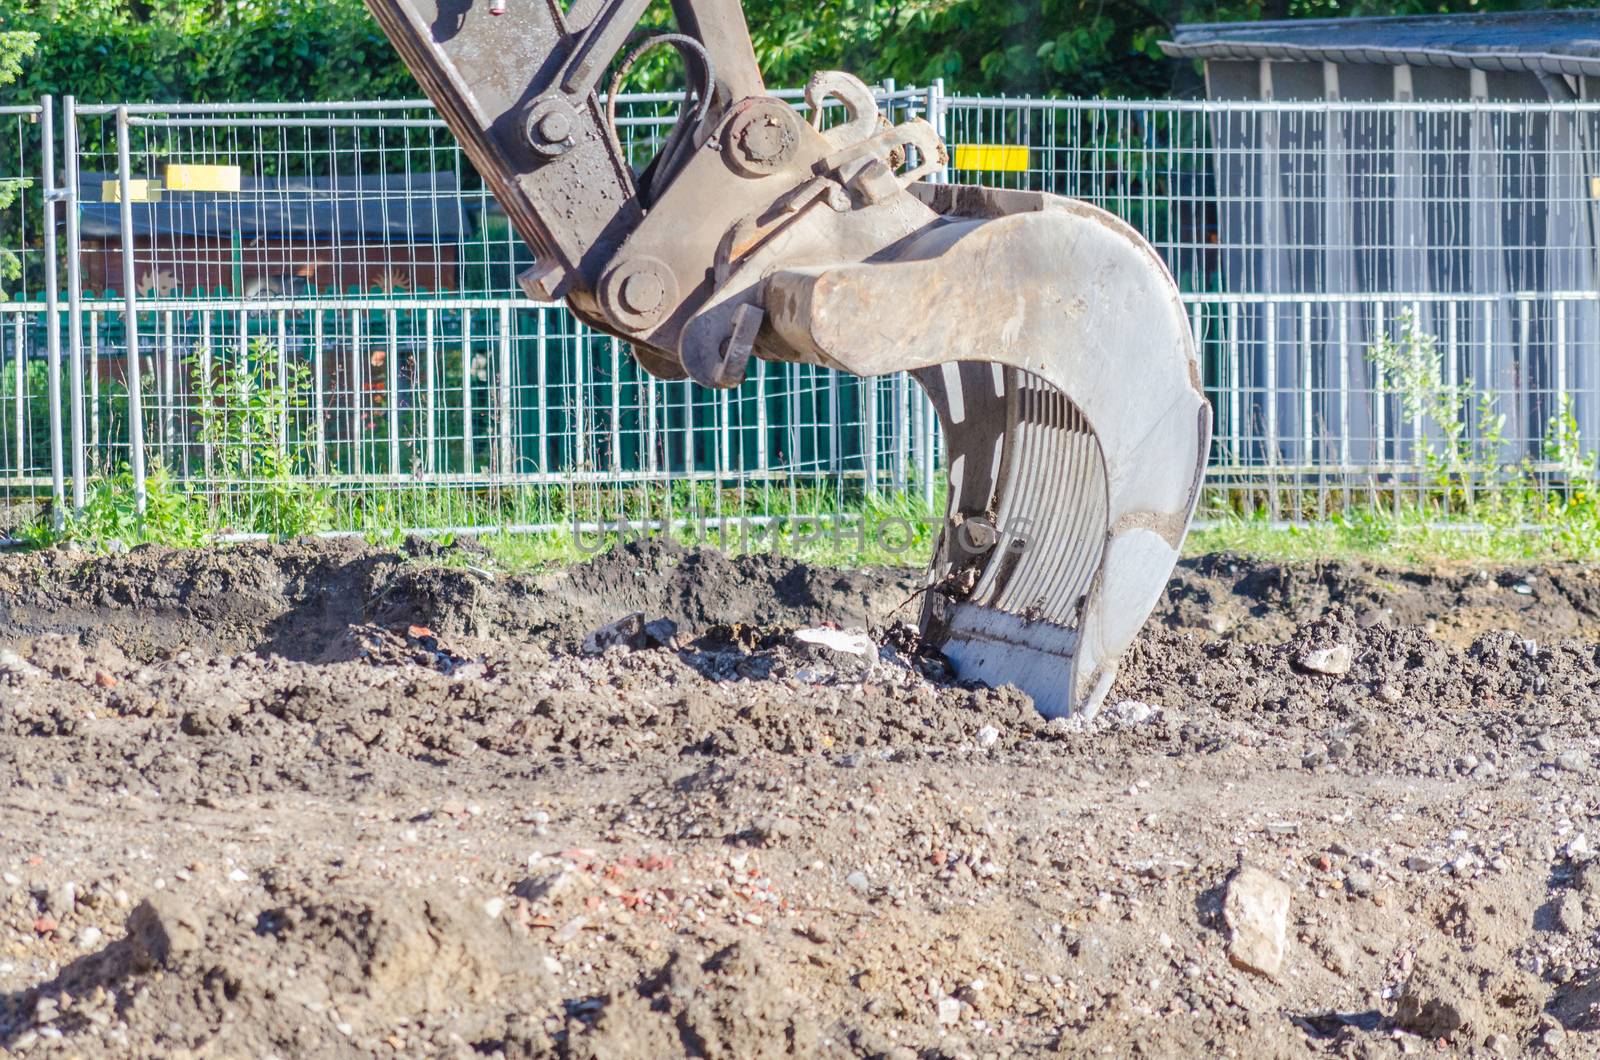 Large excavator shovel in use in earthworks on a building site.